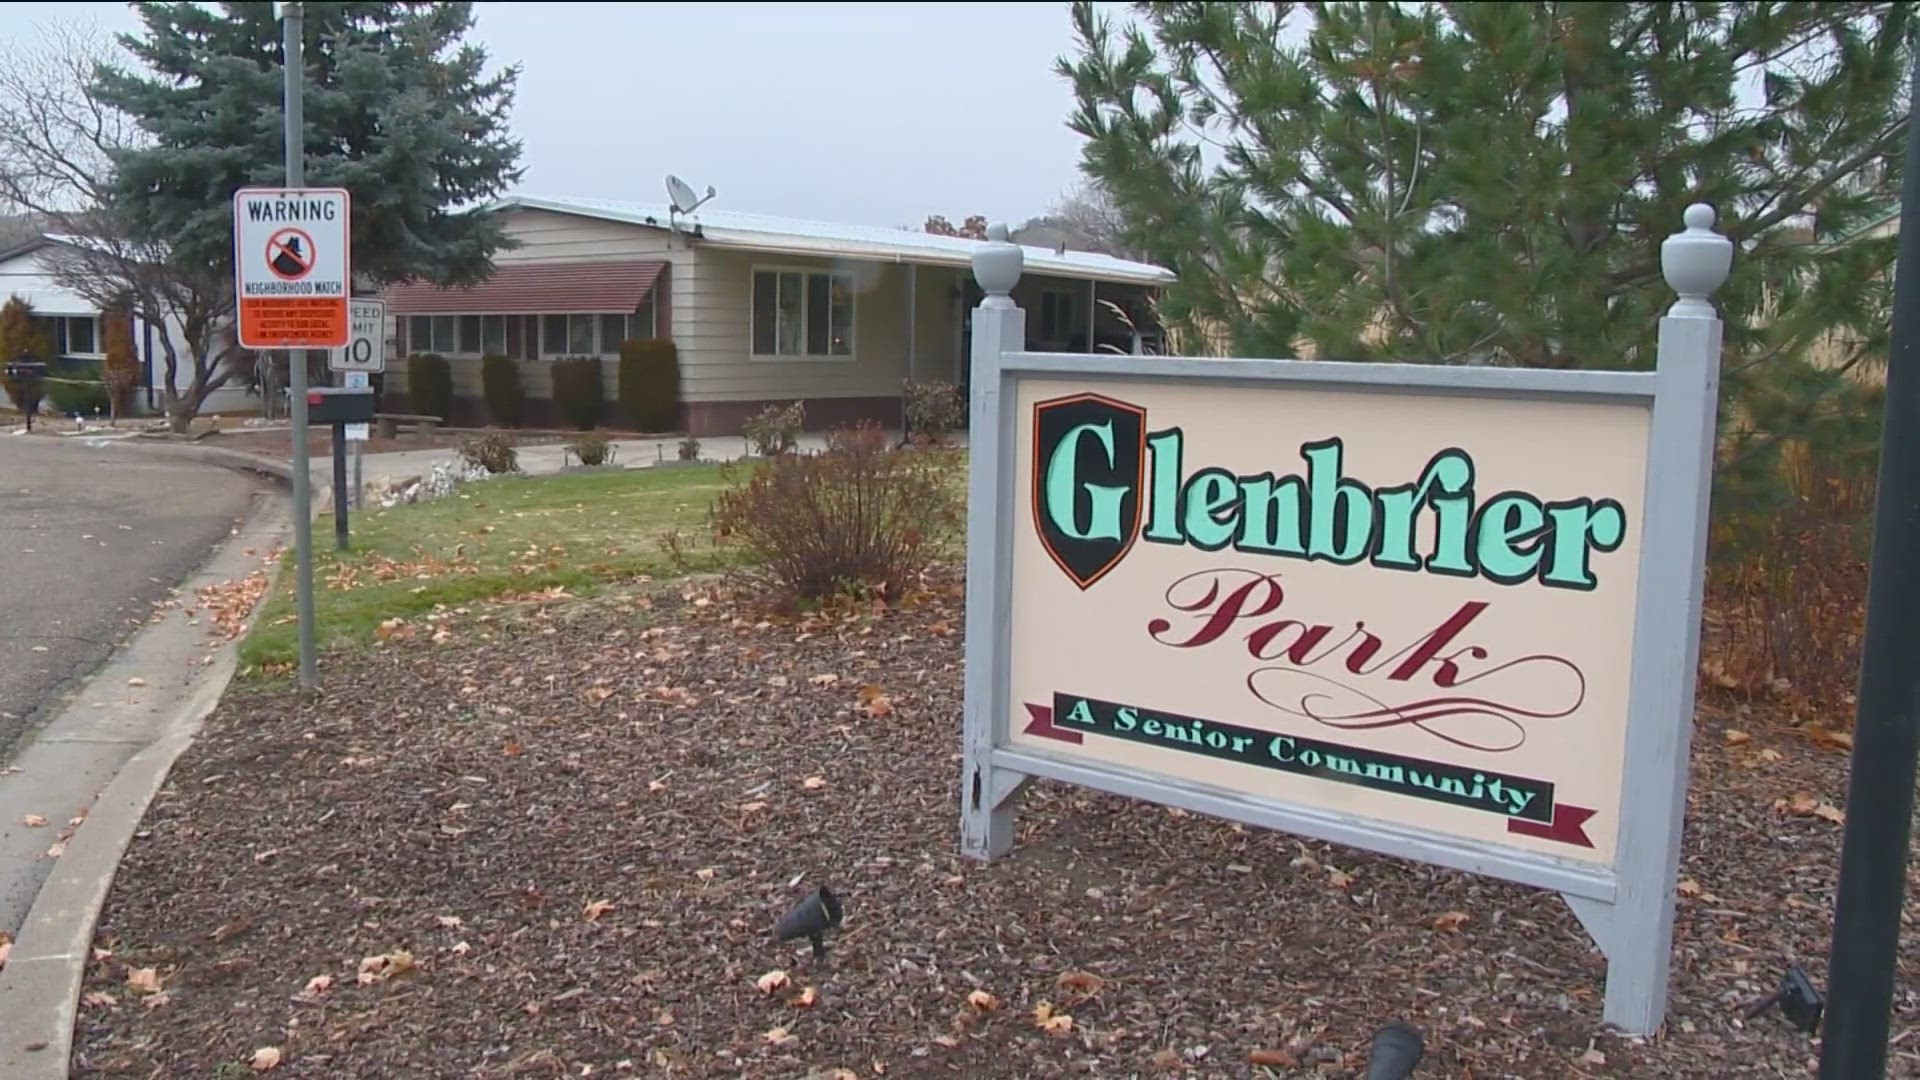 When 80-year-old Gordon Hastings moved into Glenbrier Park 15 years ago, he paid $320 monthly rent. Now, he pays more than $700.